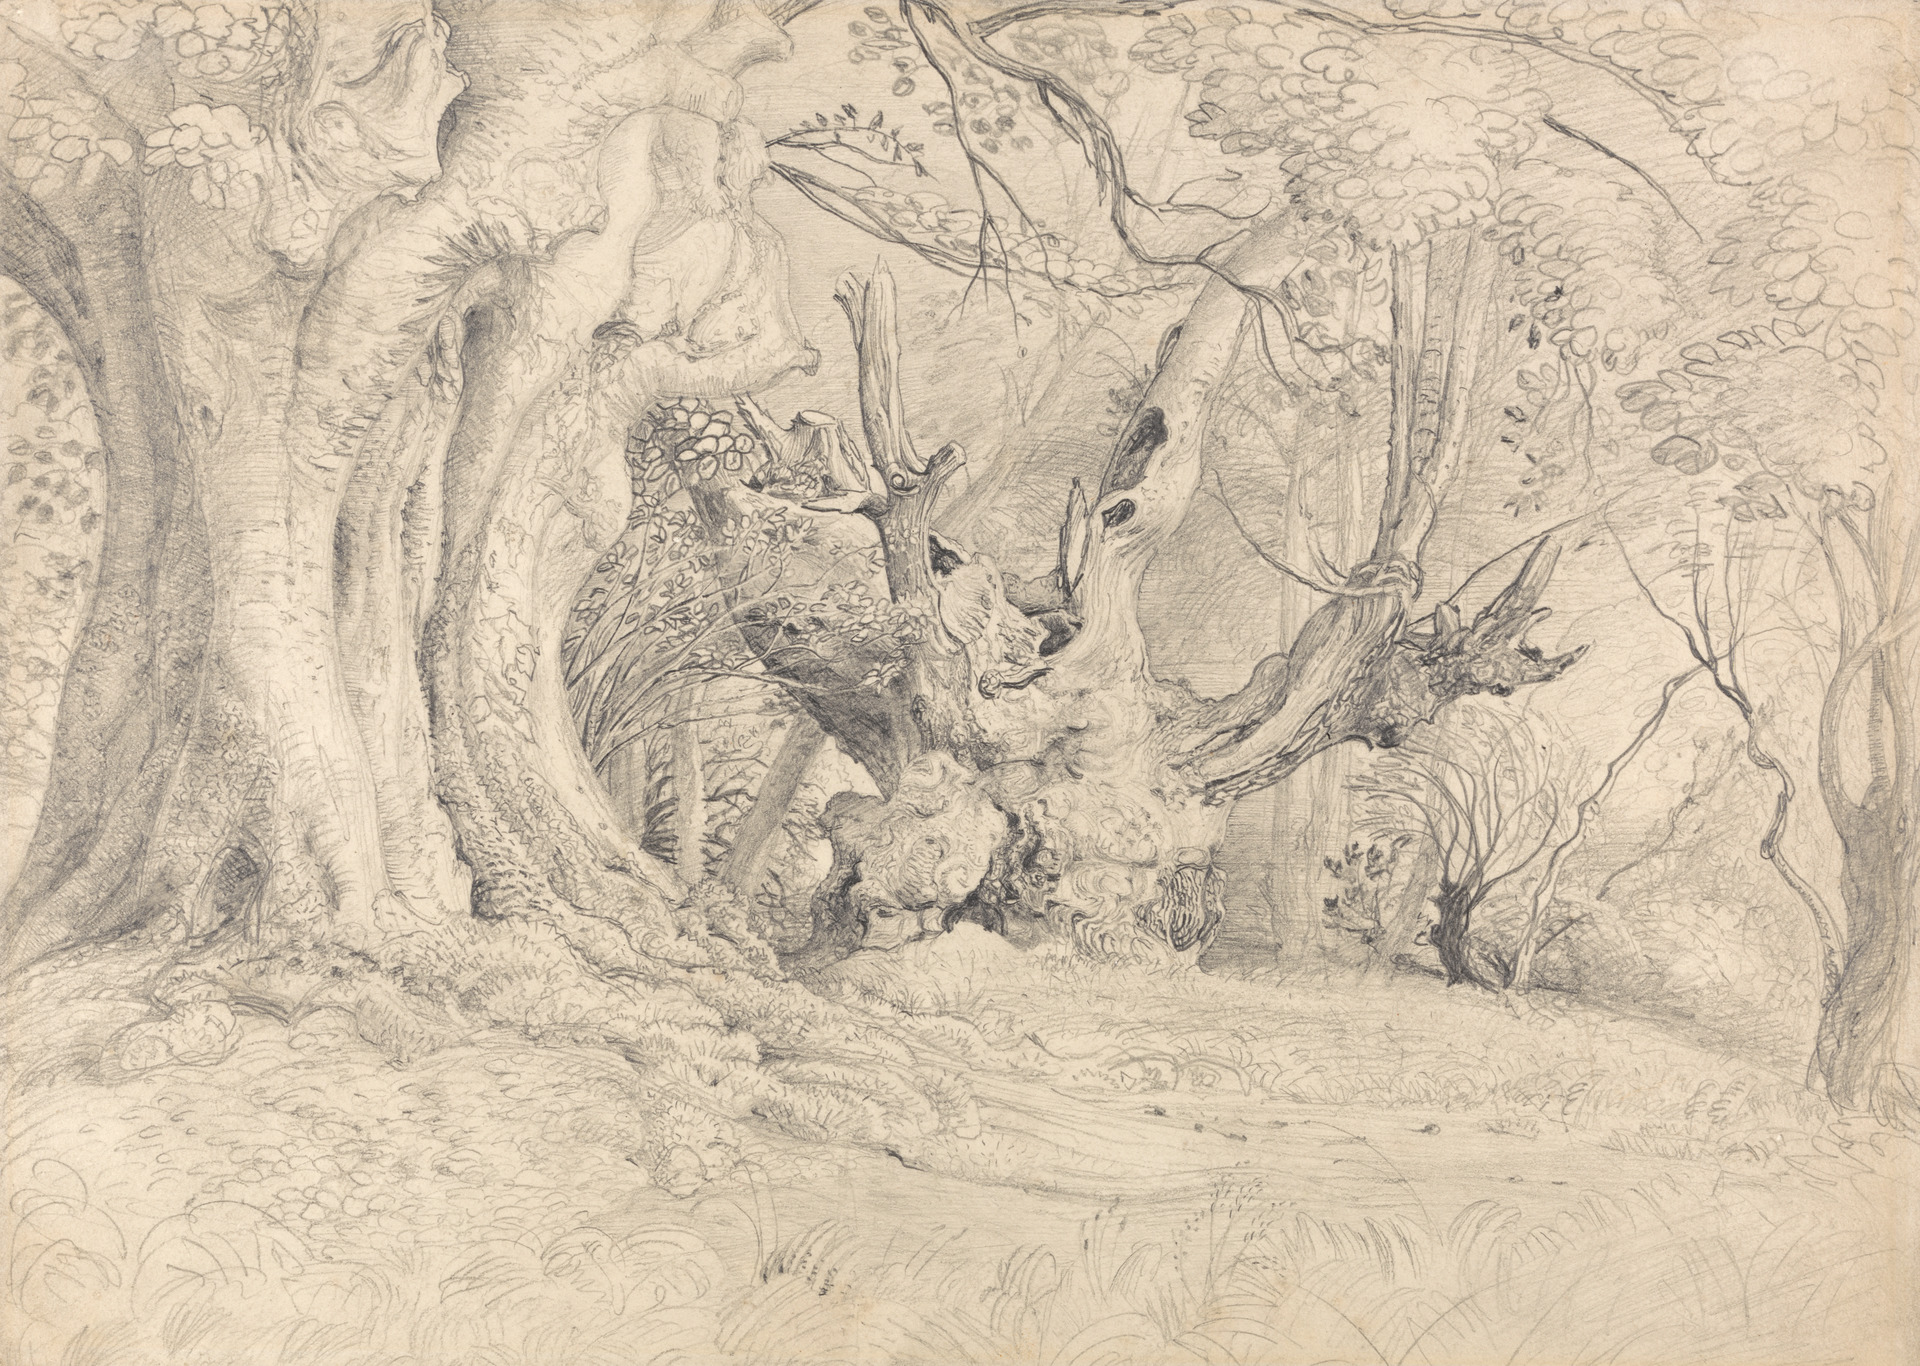 Sketch of wide old trees